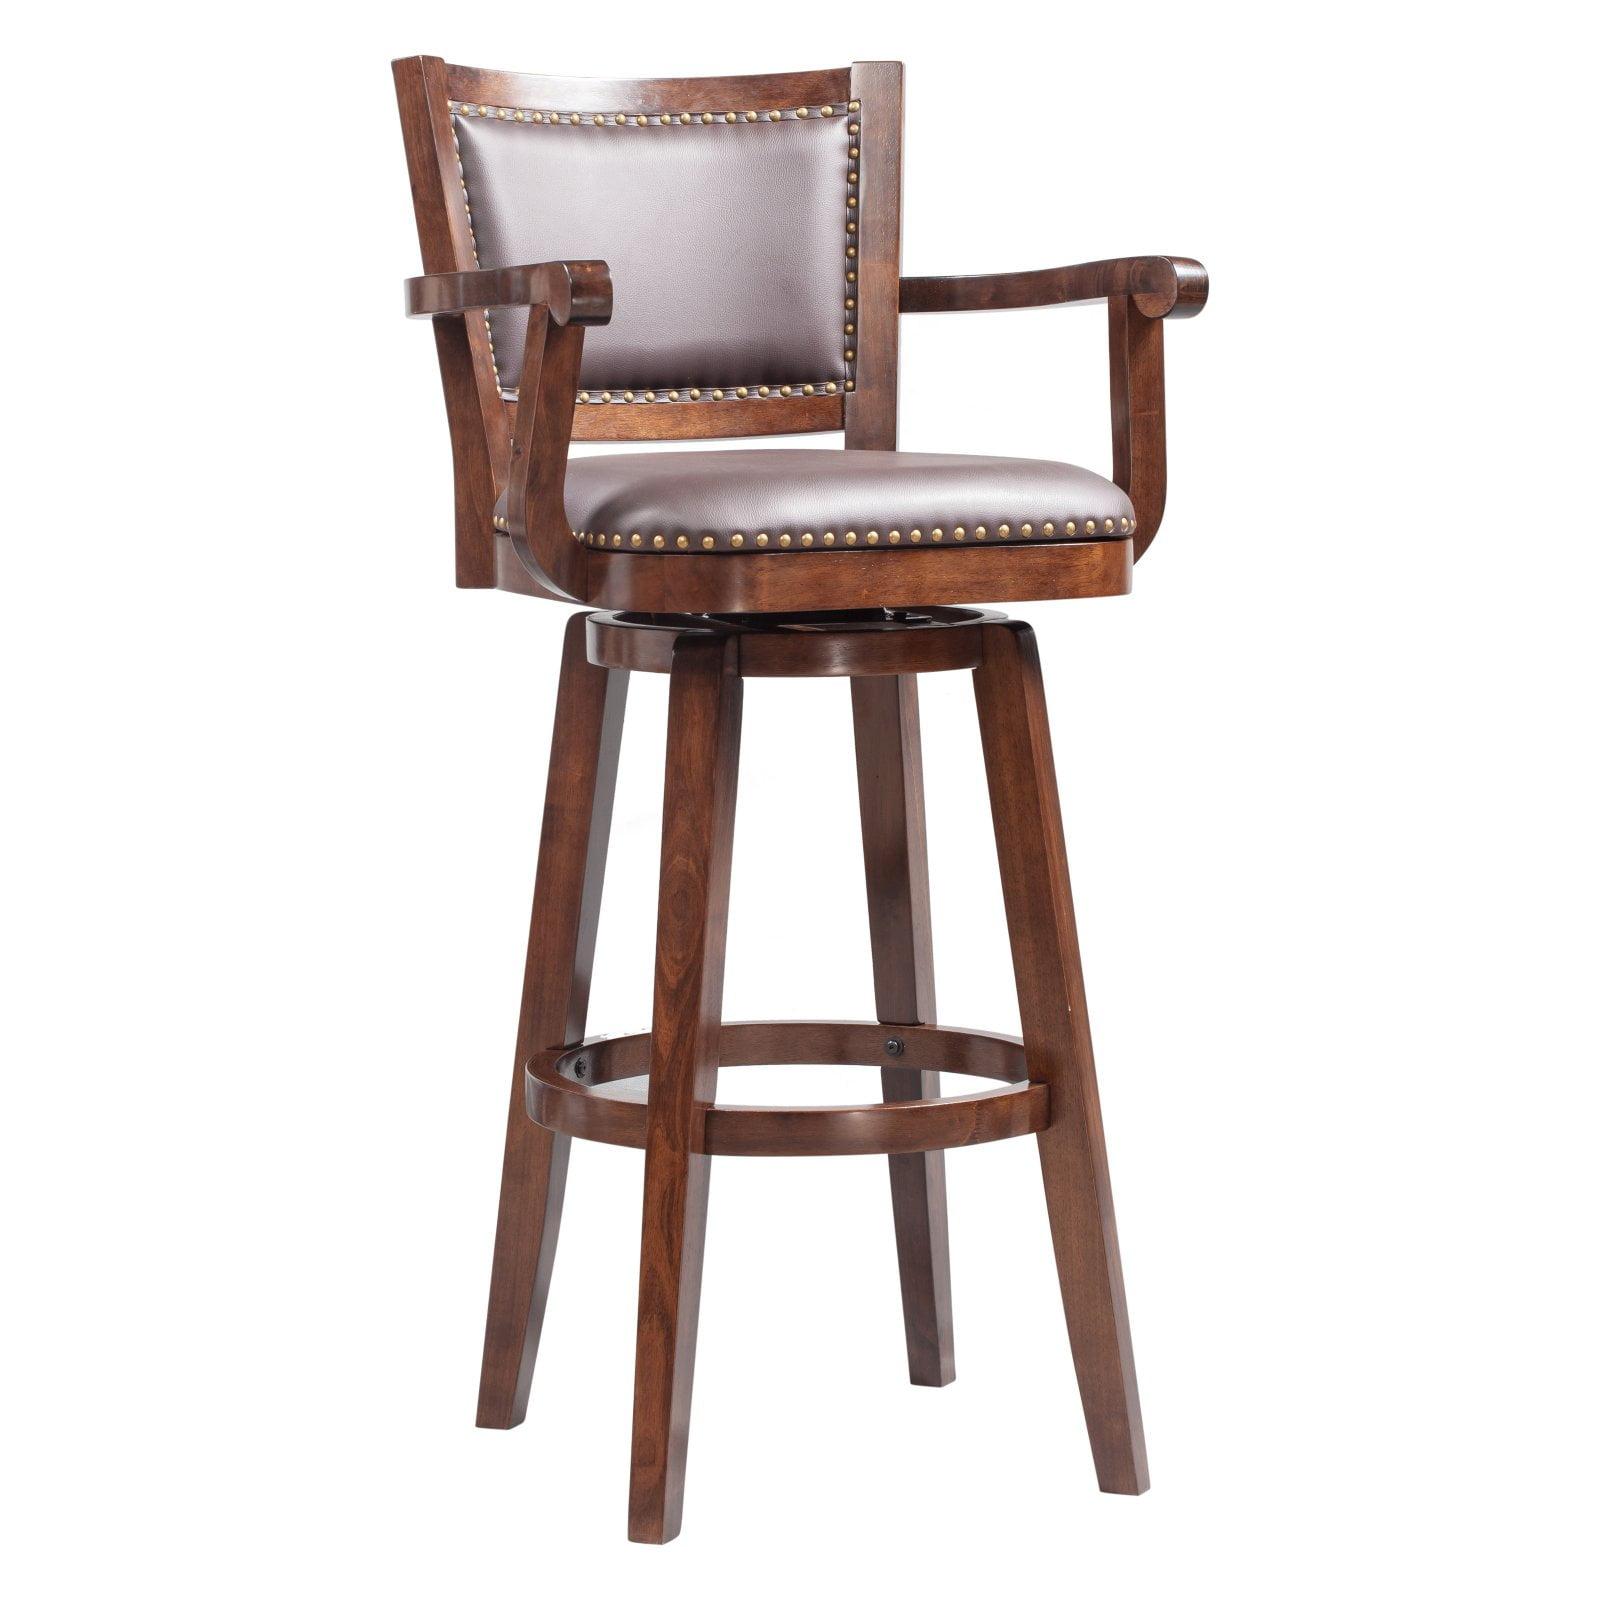 Broadmoor 41" Cappuccino Swivel Extra Tall Barstool with Leather